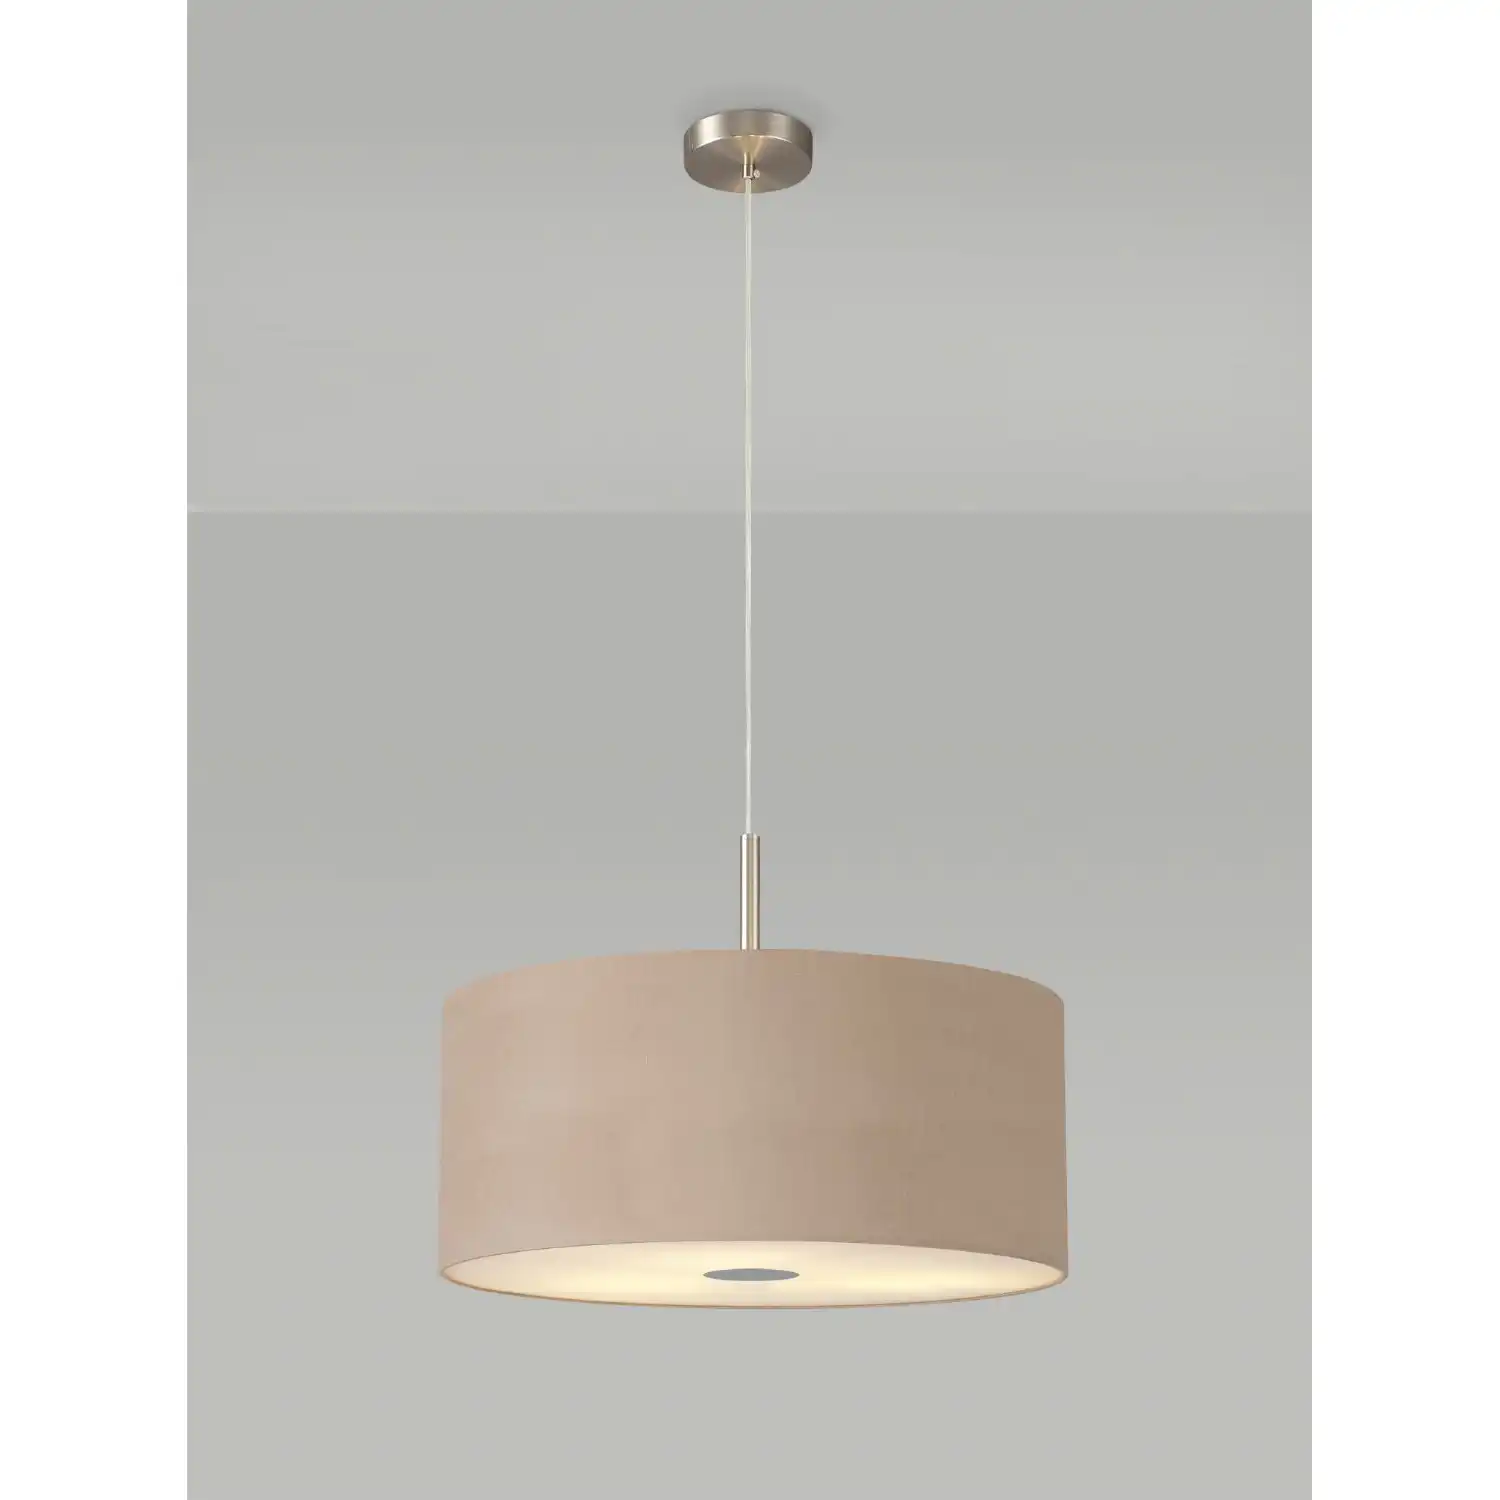 Baymont Satin Nickel 3m 3 Light E27 Single Pendant c w 500 x 200mm Dual Faux Silk Fabric Shade, Antique Gold Ruby And 500mm Frosted PC Acrylic Diffuser